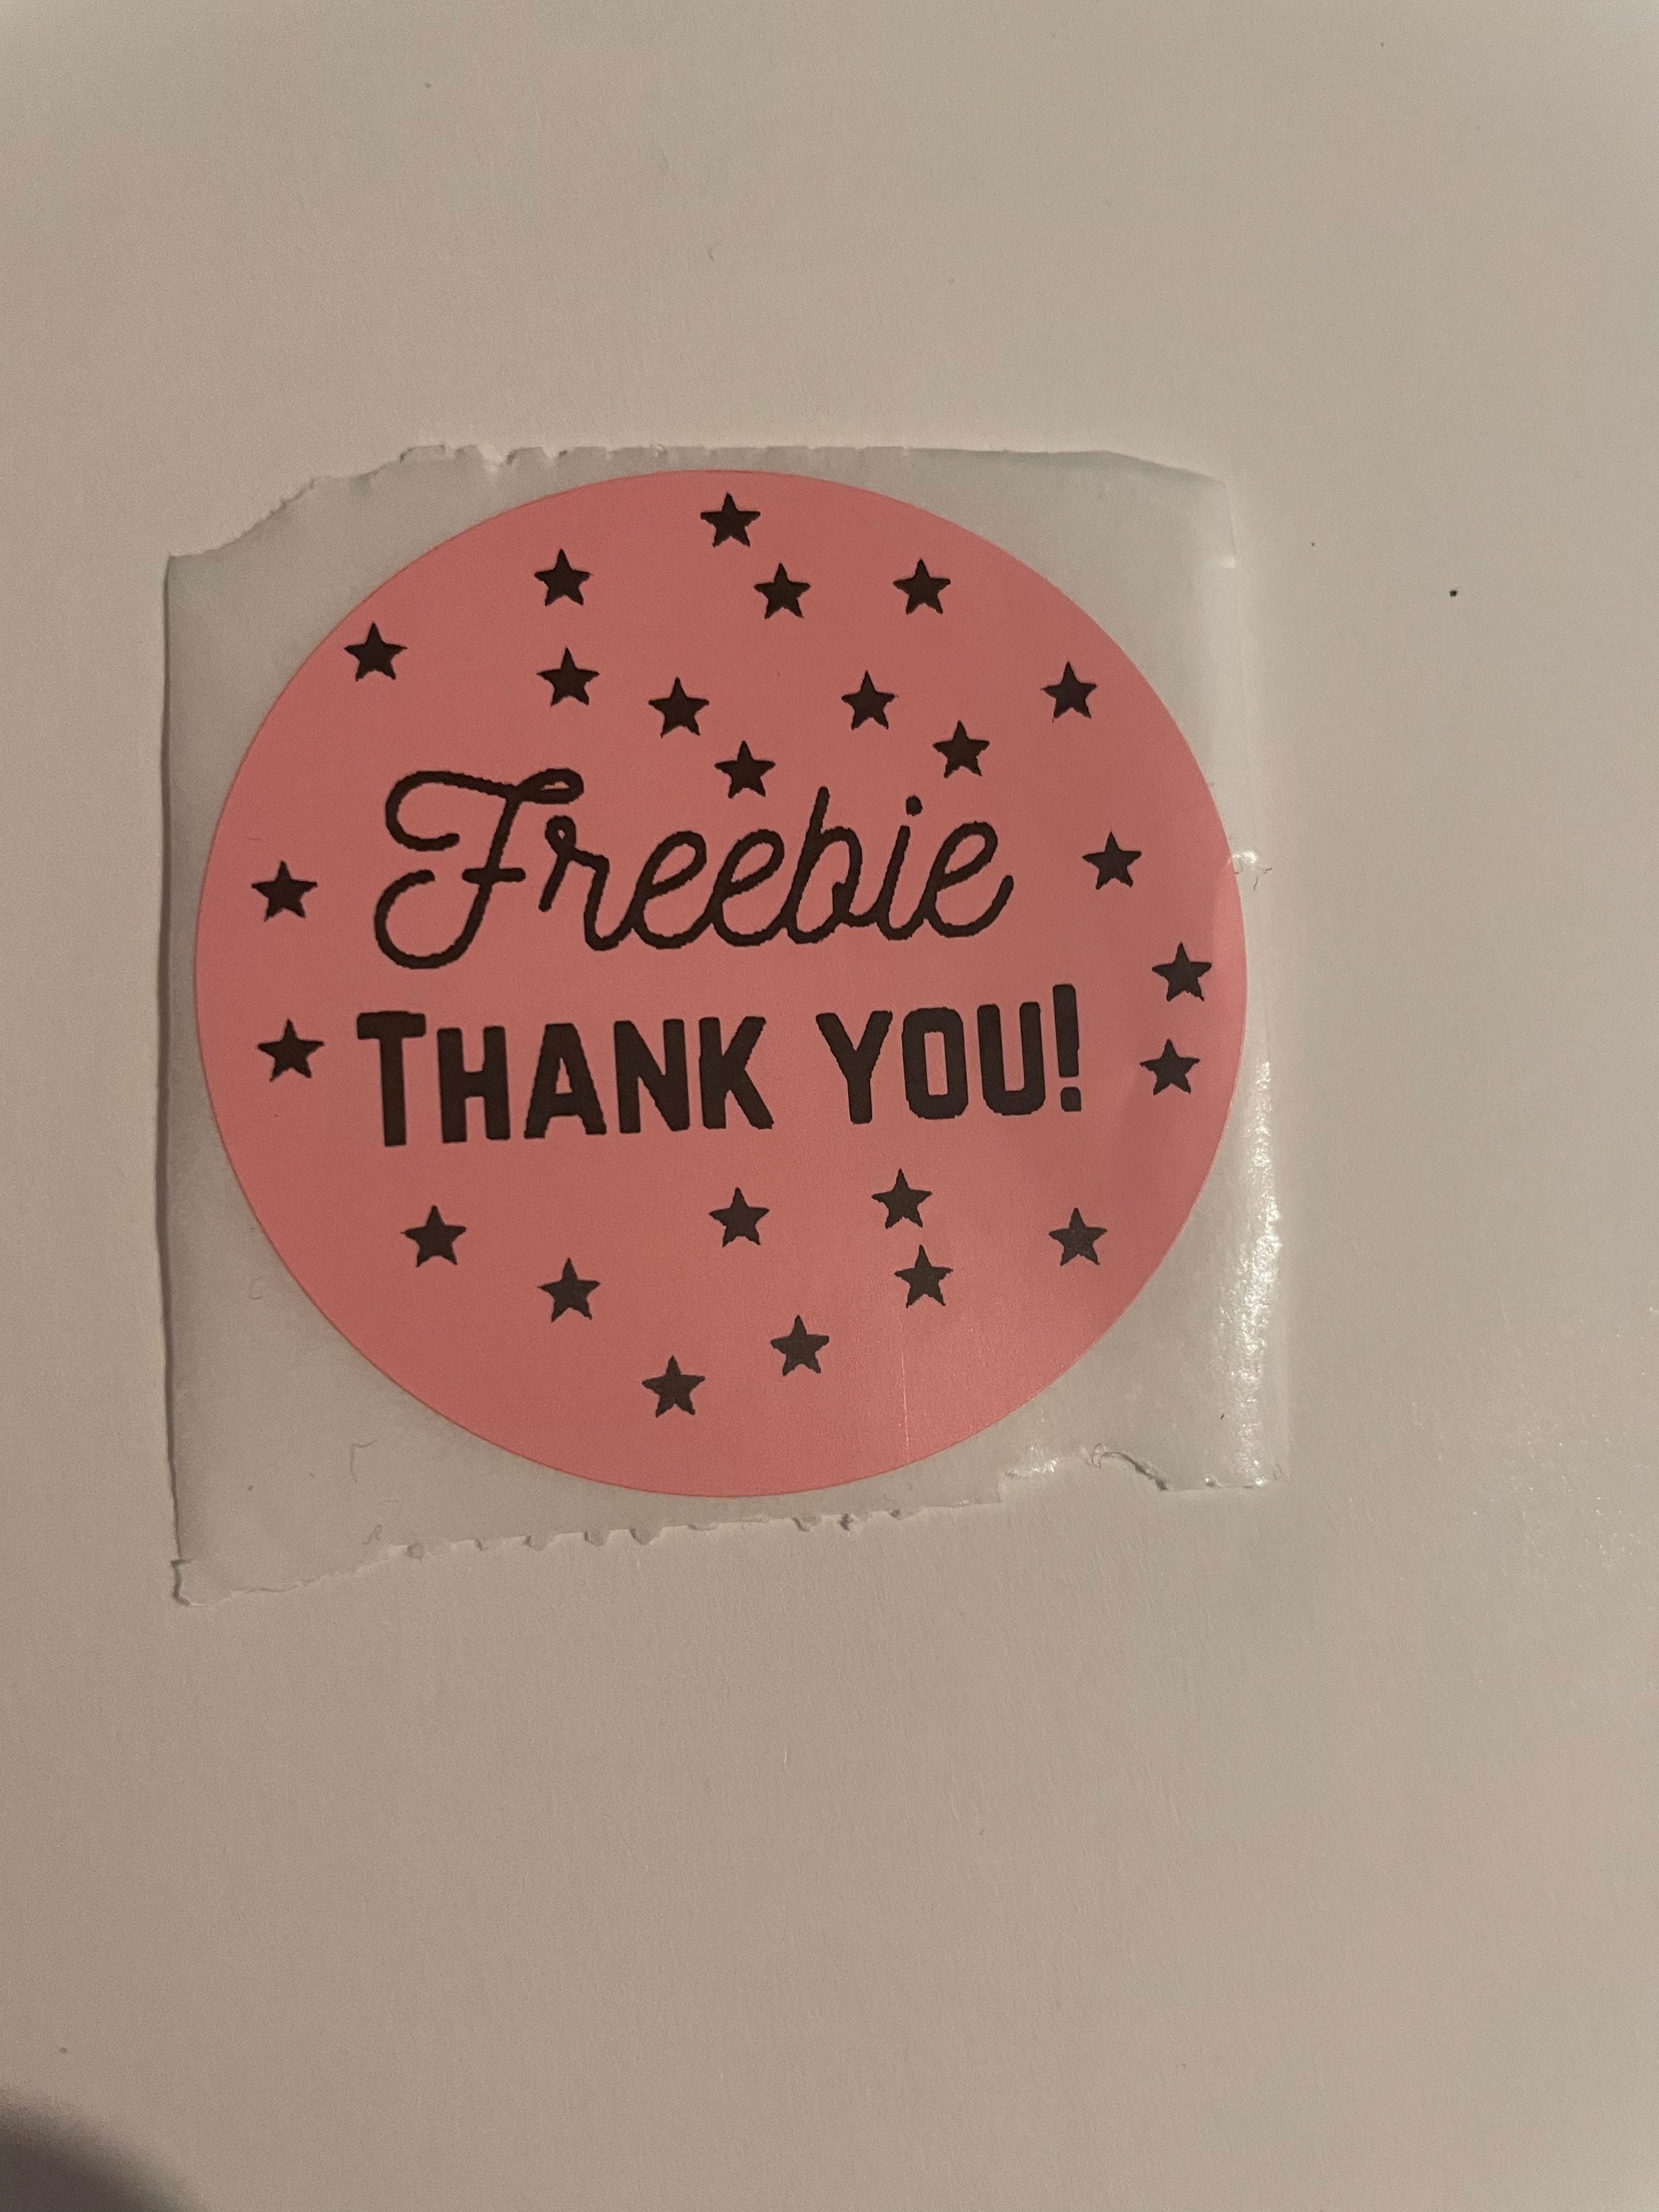 Small Business - Freebie Stickers - Printed Stickers for Packaging - Fast  Shipping 2.25 x 1.25